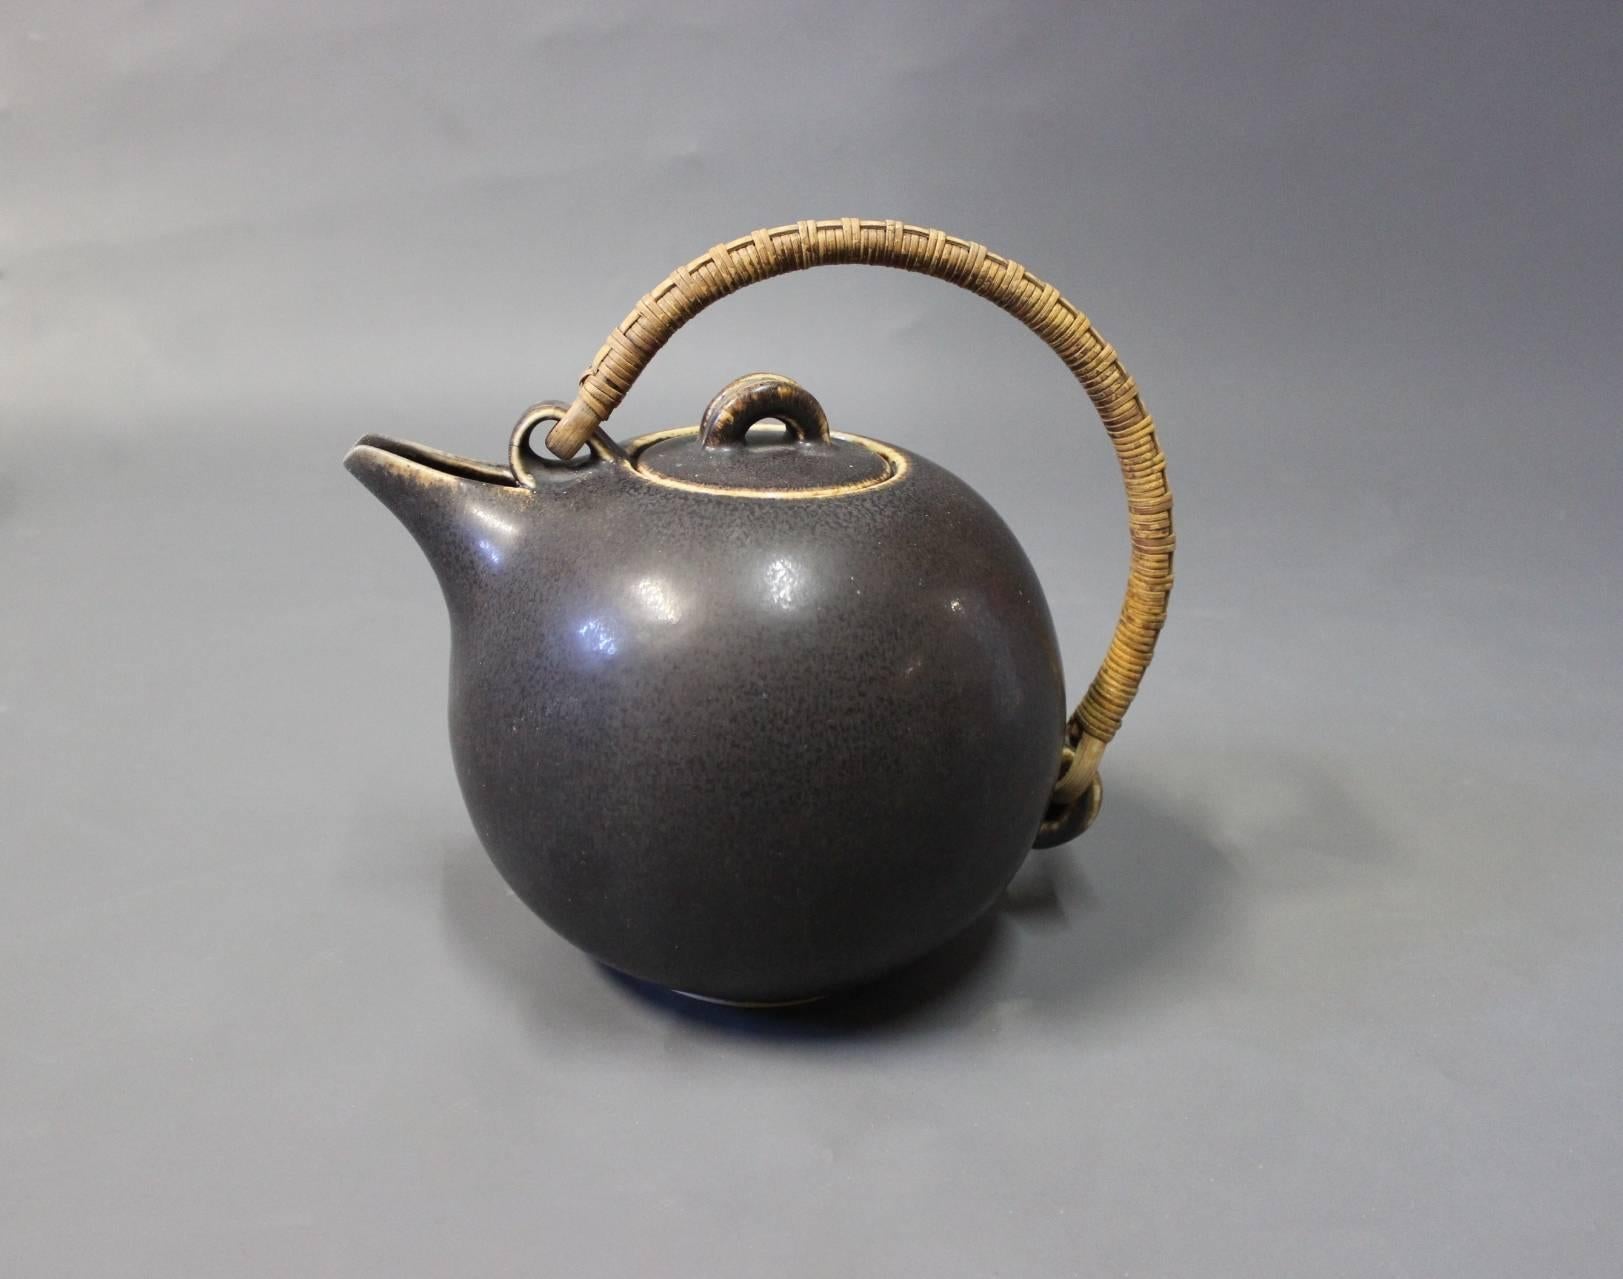 Dark brown glazed stoneware teapot with bast handle from circa 1940s. The teapot is stamped Saxbo Denmark and with the no. 64, designed by Eva Stæhr Nielsen.